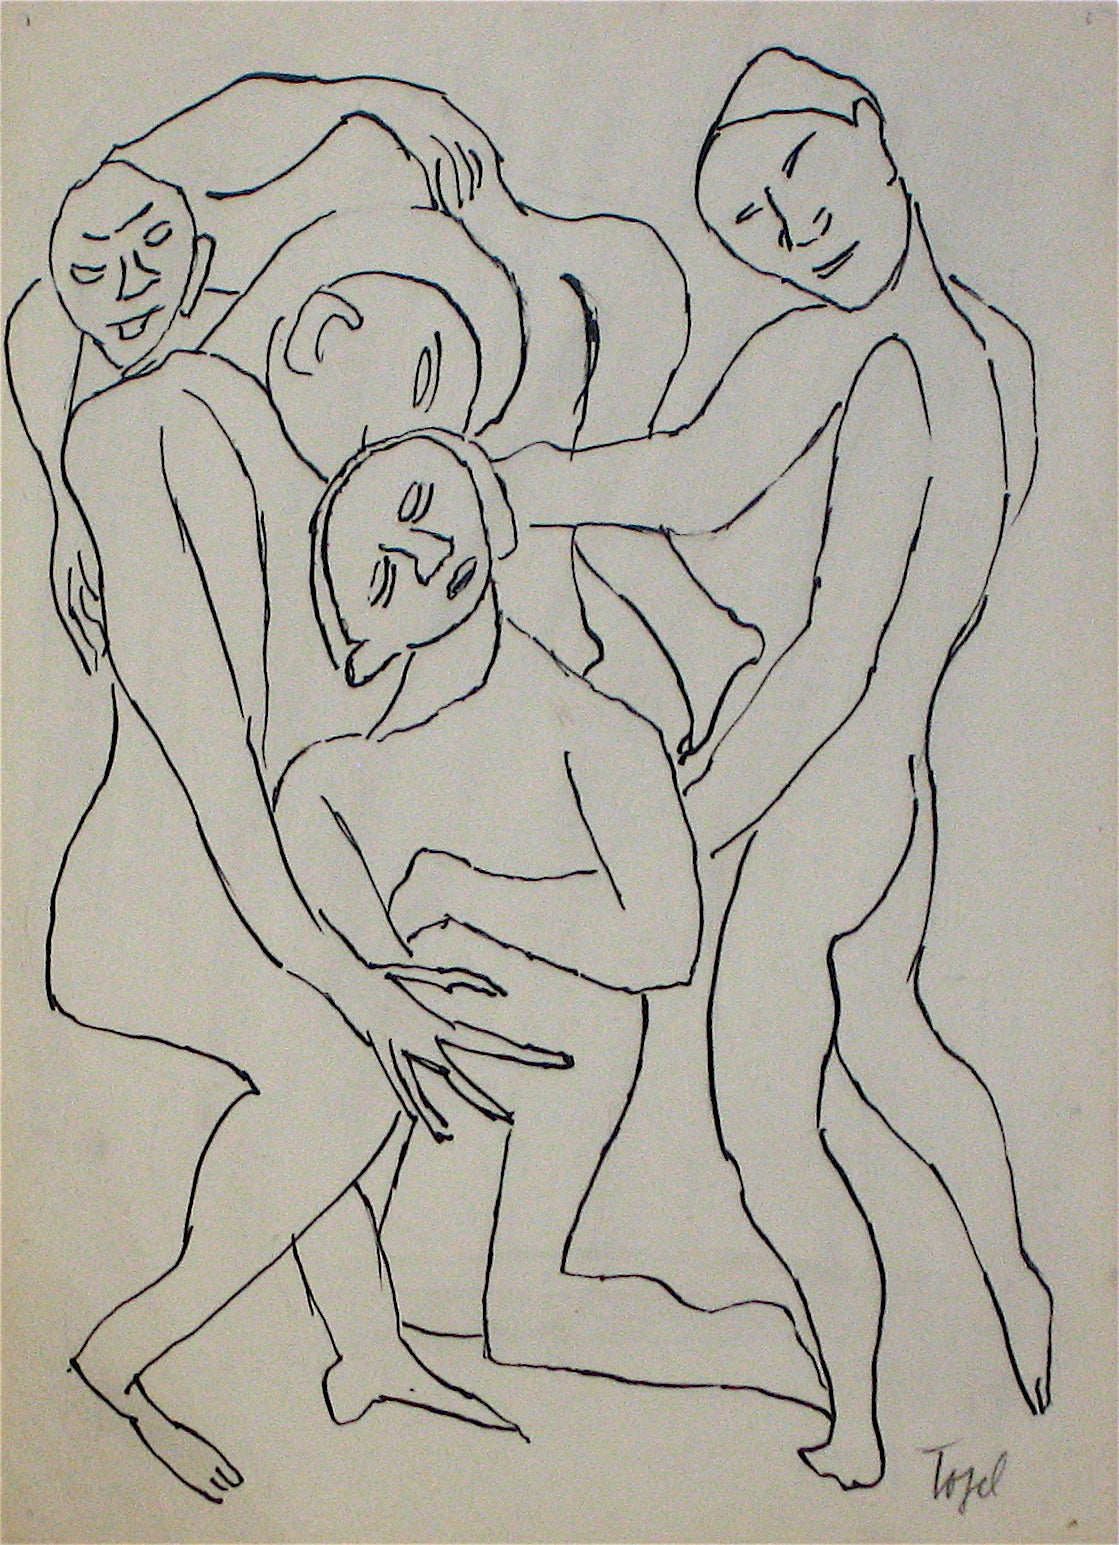 Abstracted Figures in a Scene &lt;br&gt;Early 20th Century Ink on Paper &lt;br&gt;&lt;br&gt;#11205